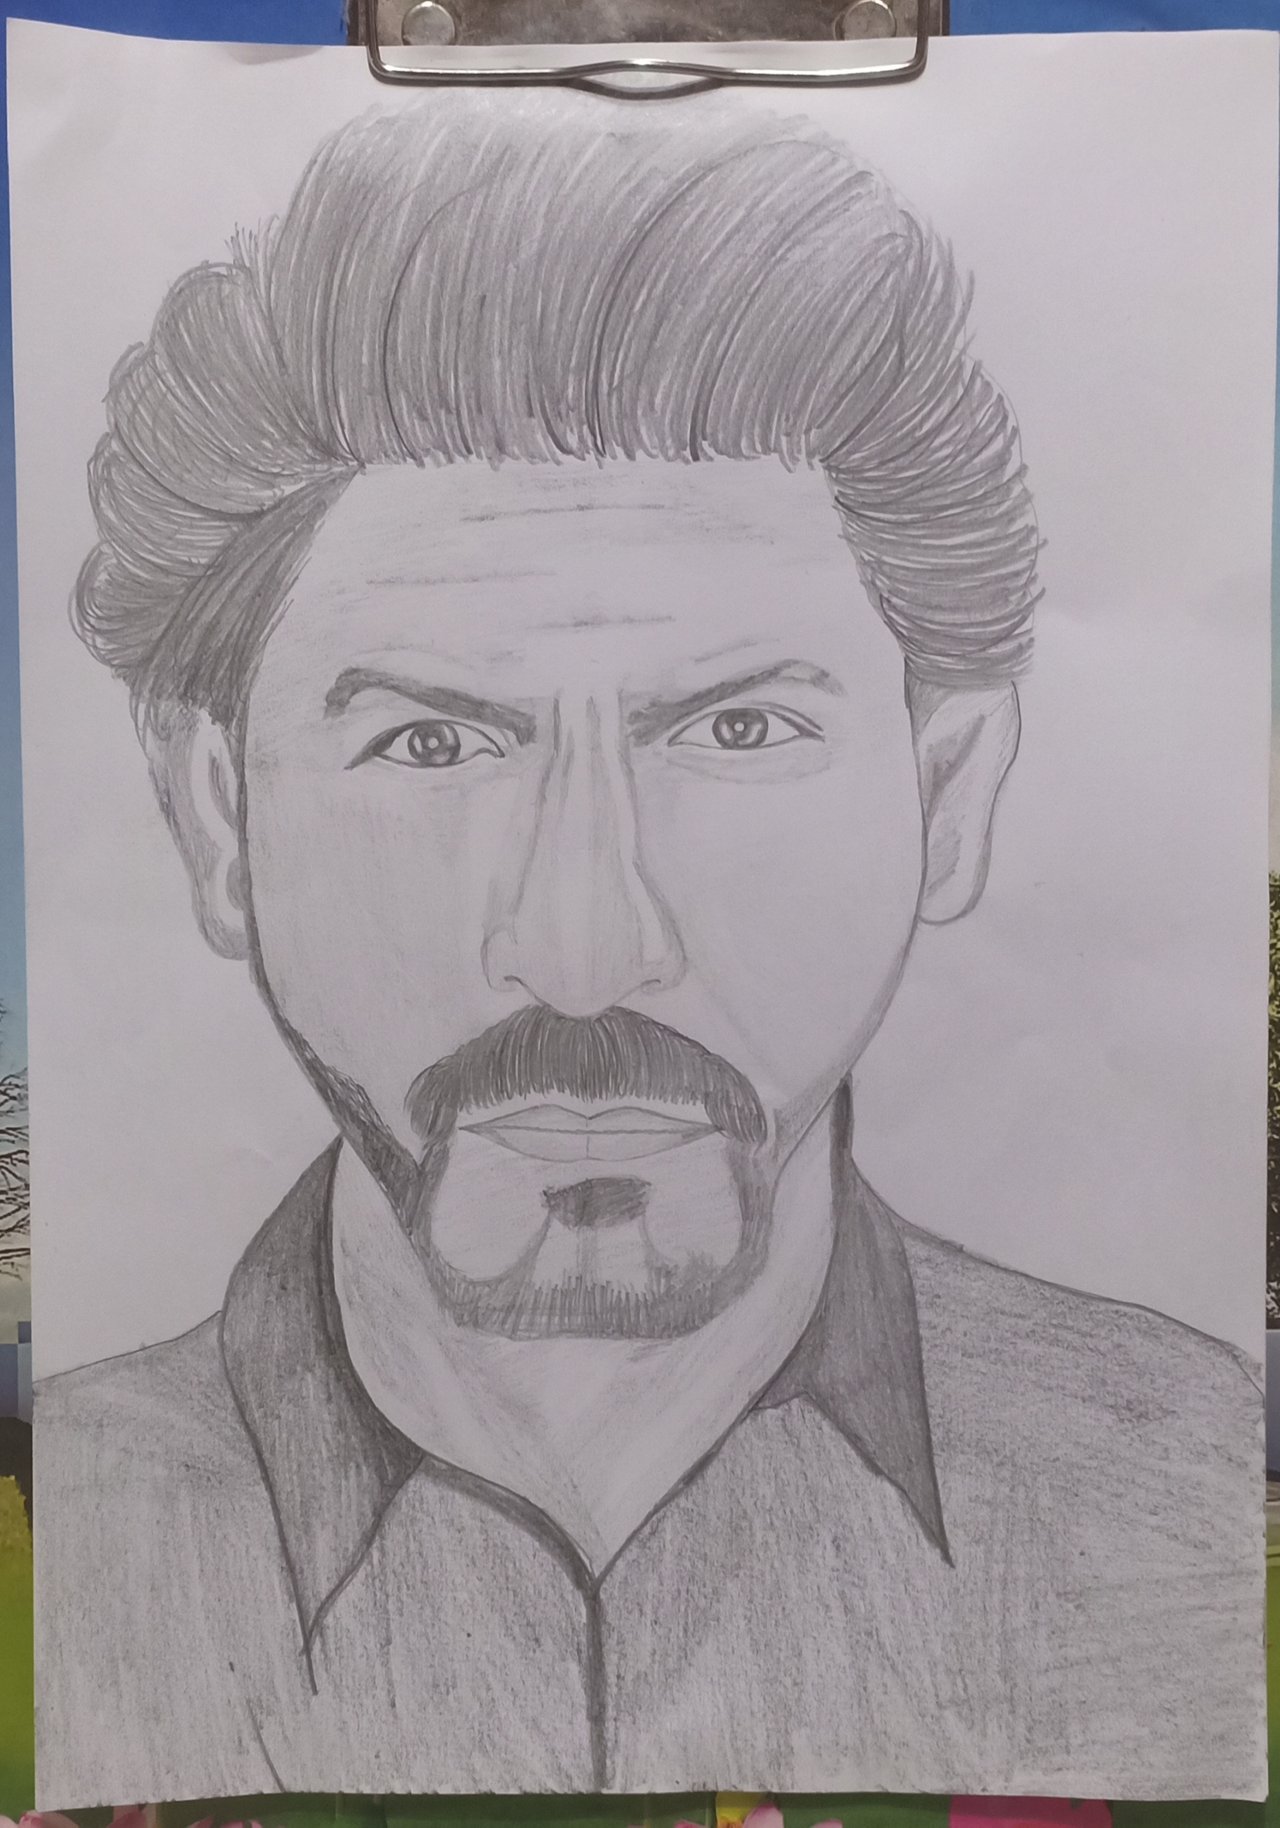 Pakistani artists make sand portrait of Shah Rukh Khan on Balochistan  beach. See pic here - India Today